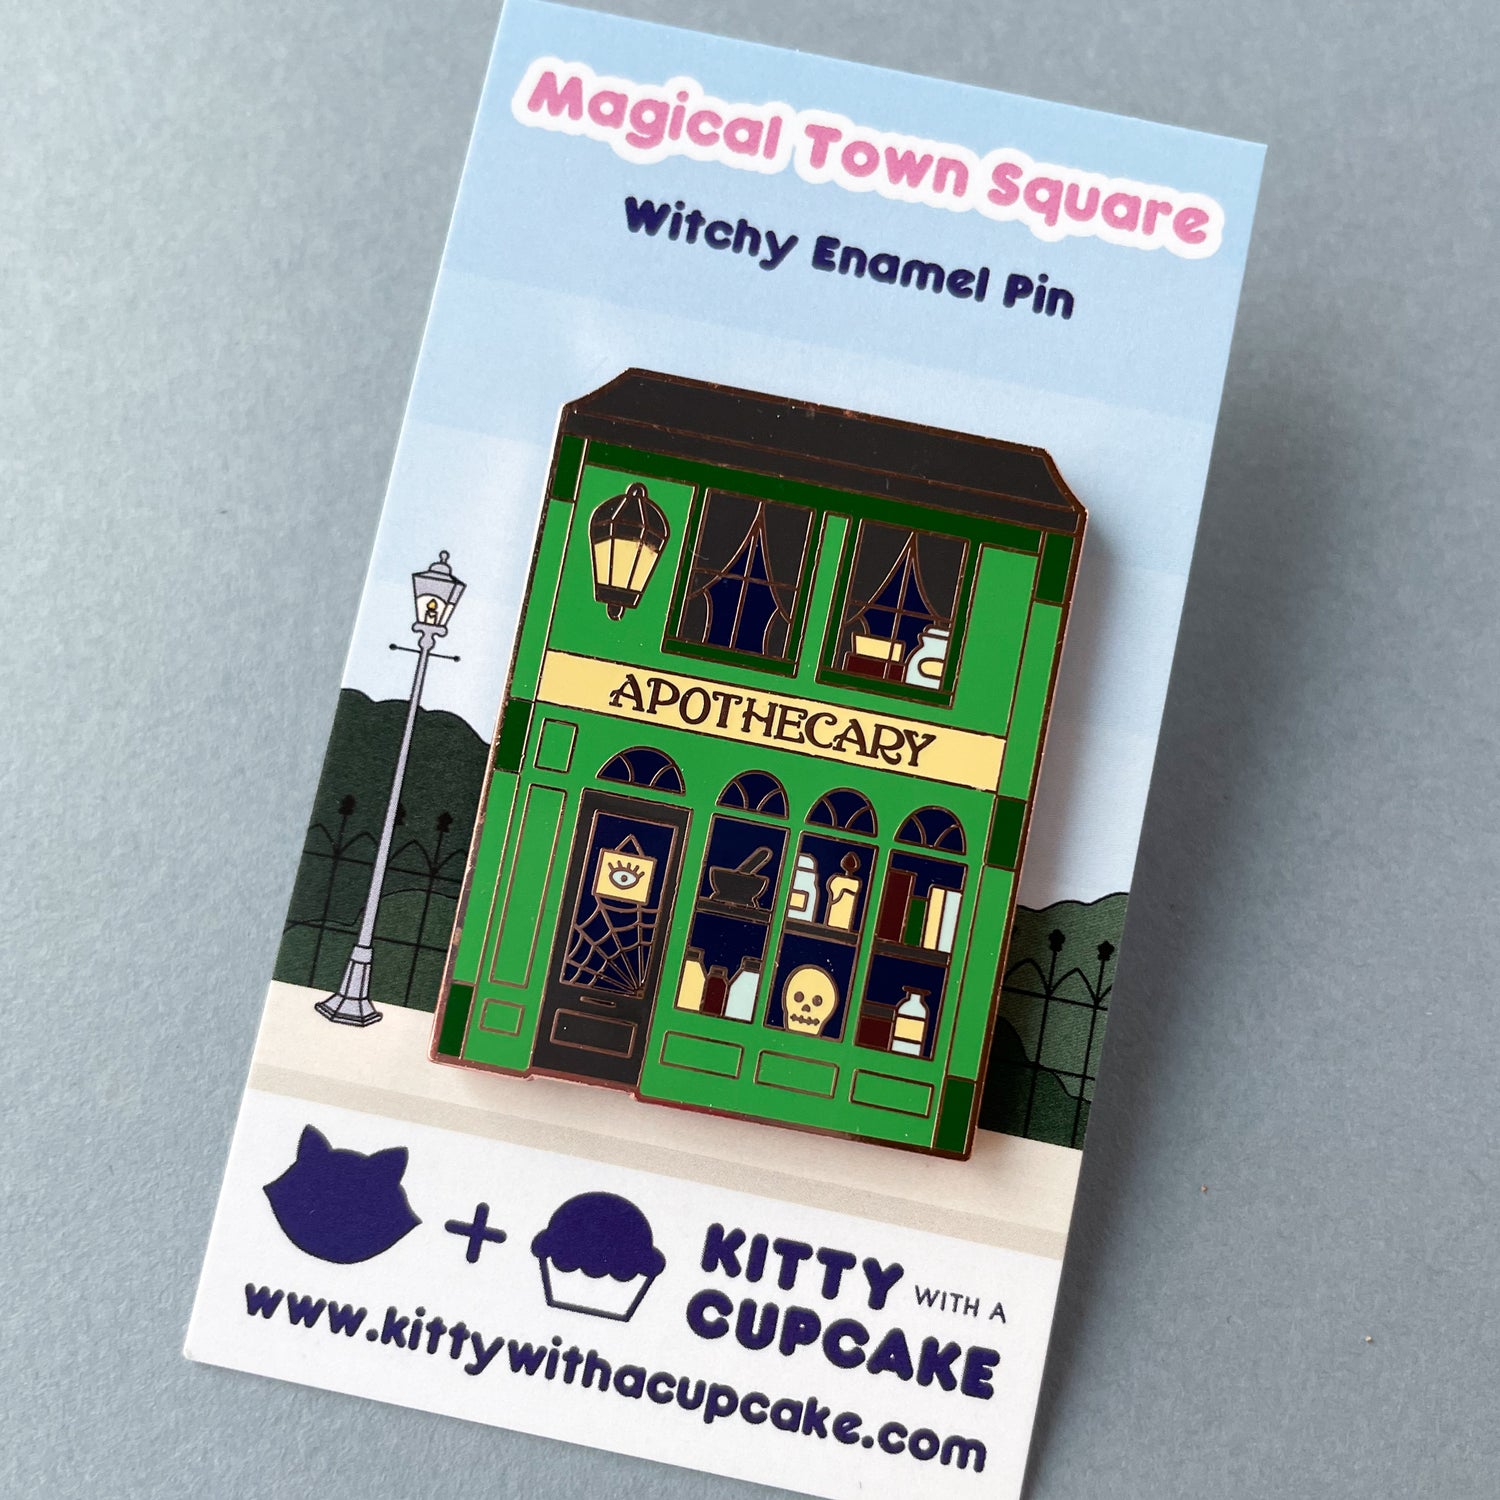 An enamel pin shaped like an Apothecary storefront on a backing card that says "Magical Town Square Witchy Enamel Pin".